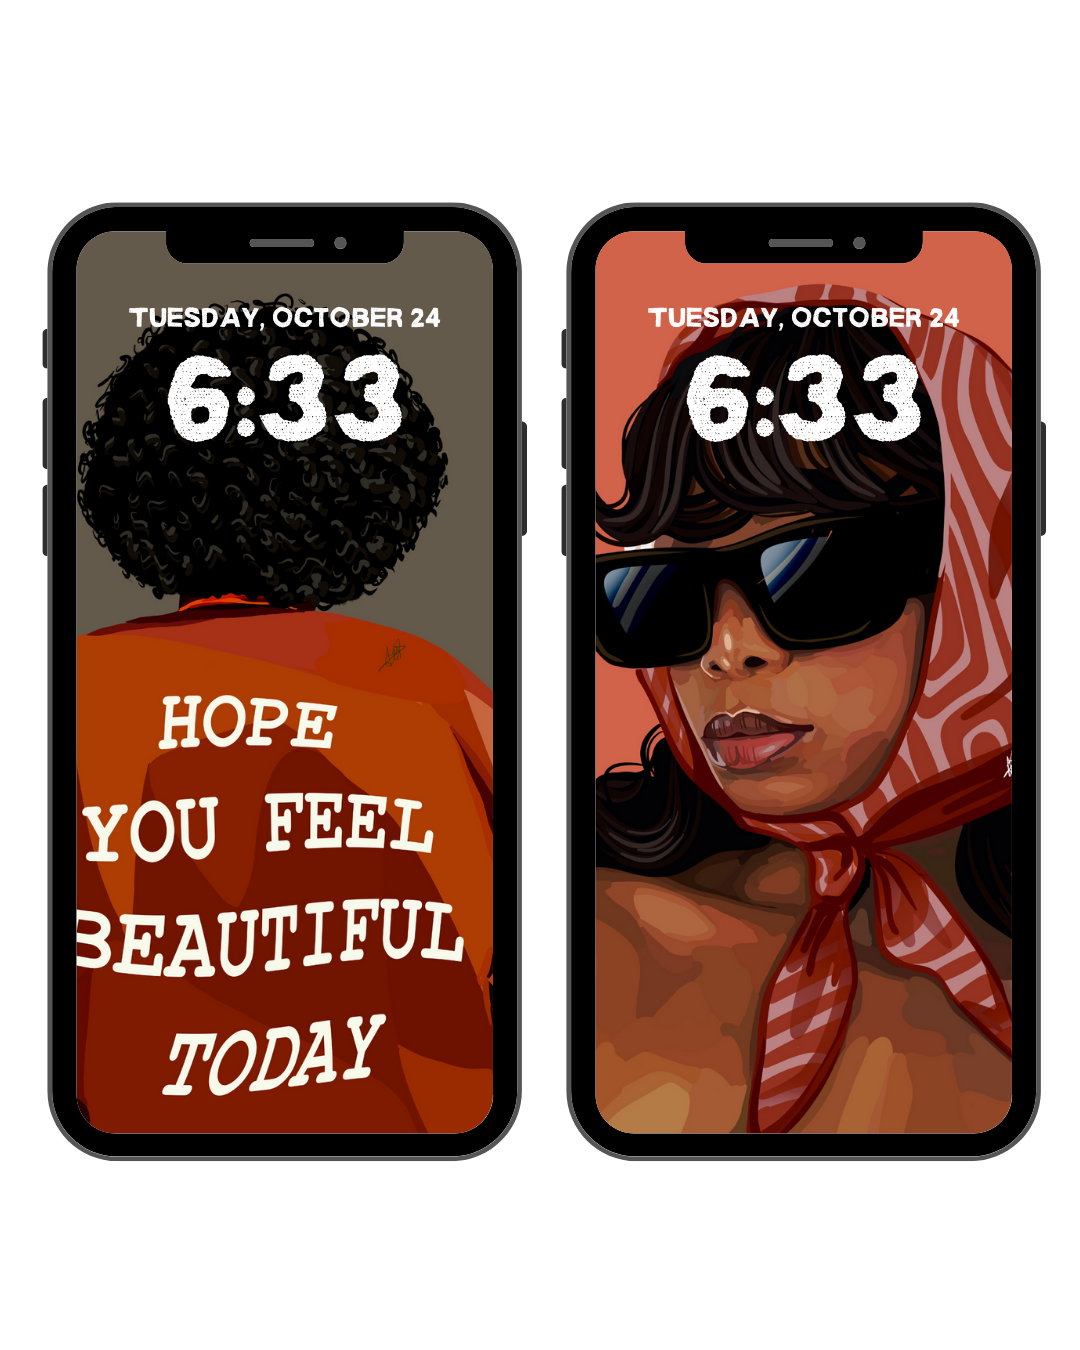 Double Pack #11 - Phone Screensaver